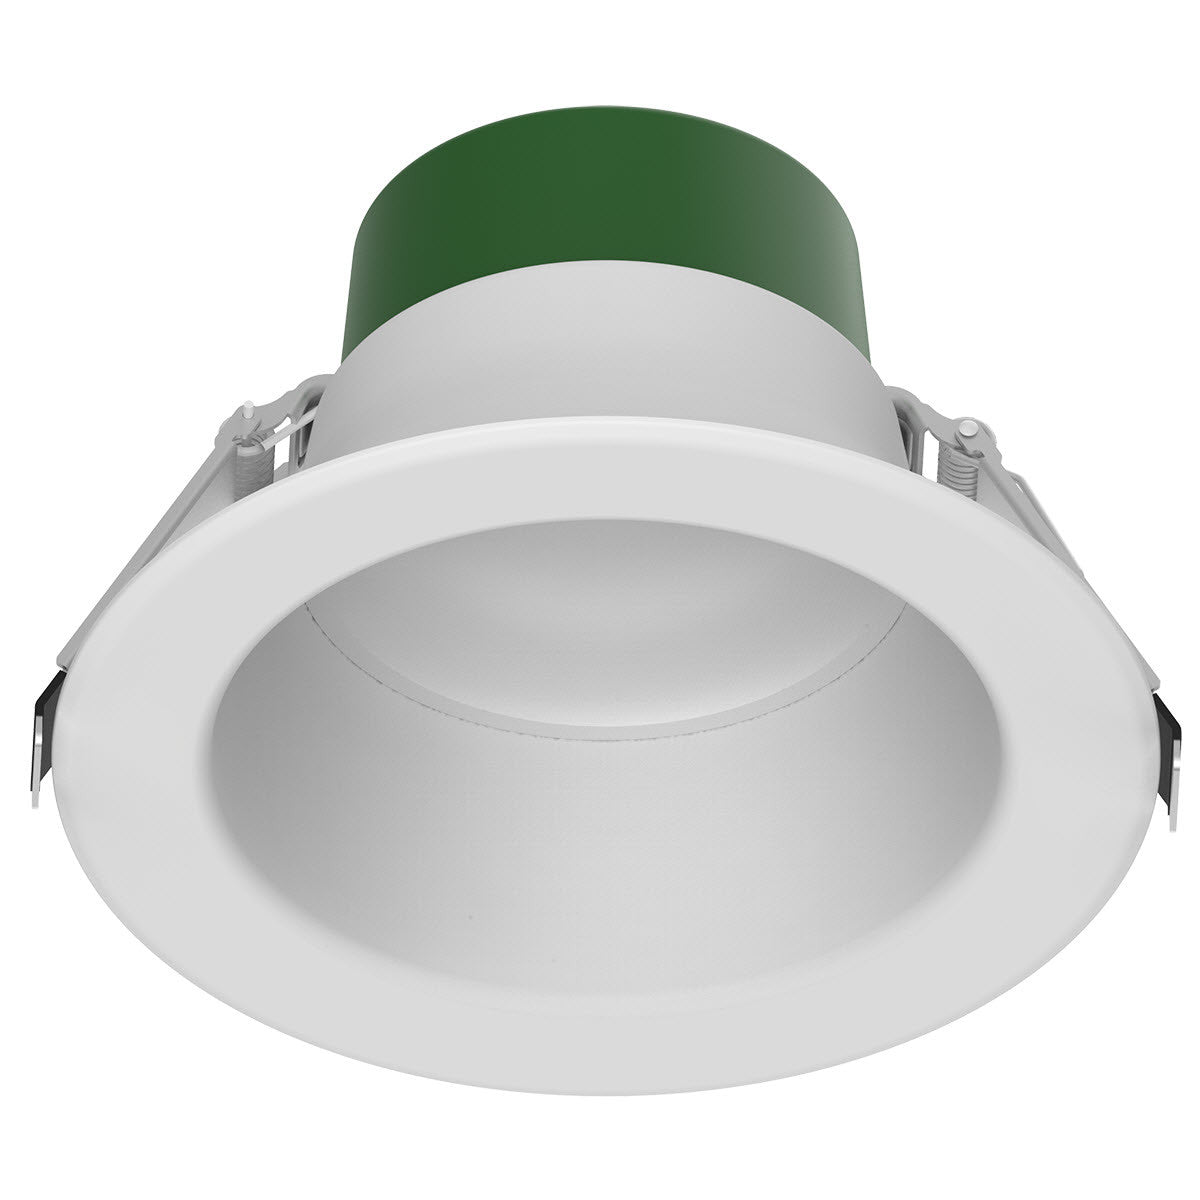 6 INCH COMMERCIAL DOWN LIGHT MULTI-WATTAGE